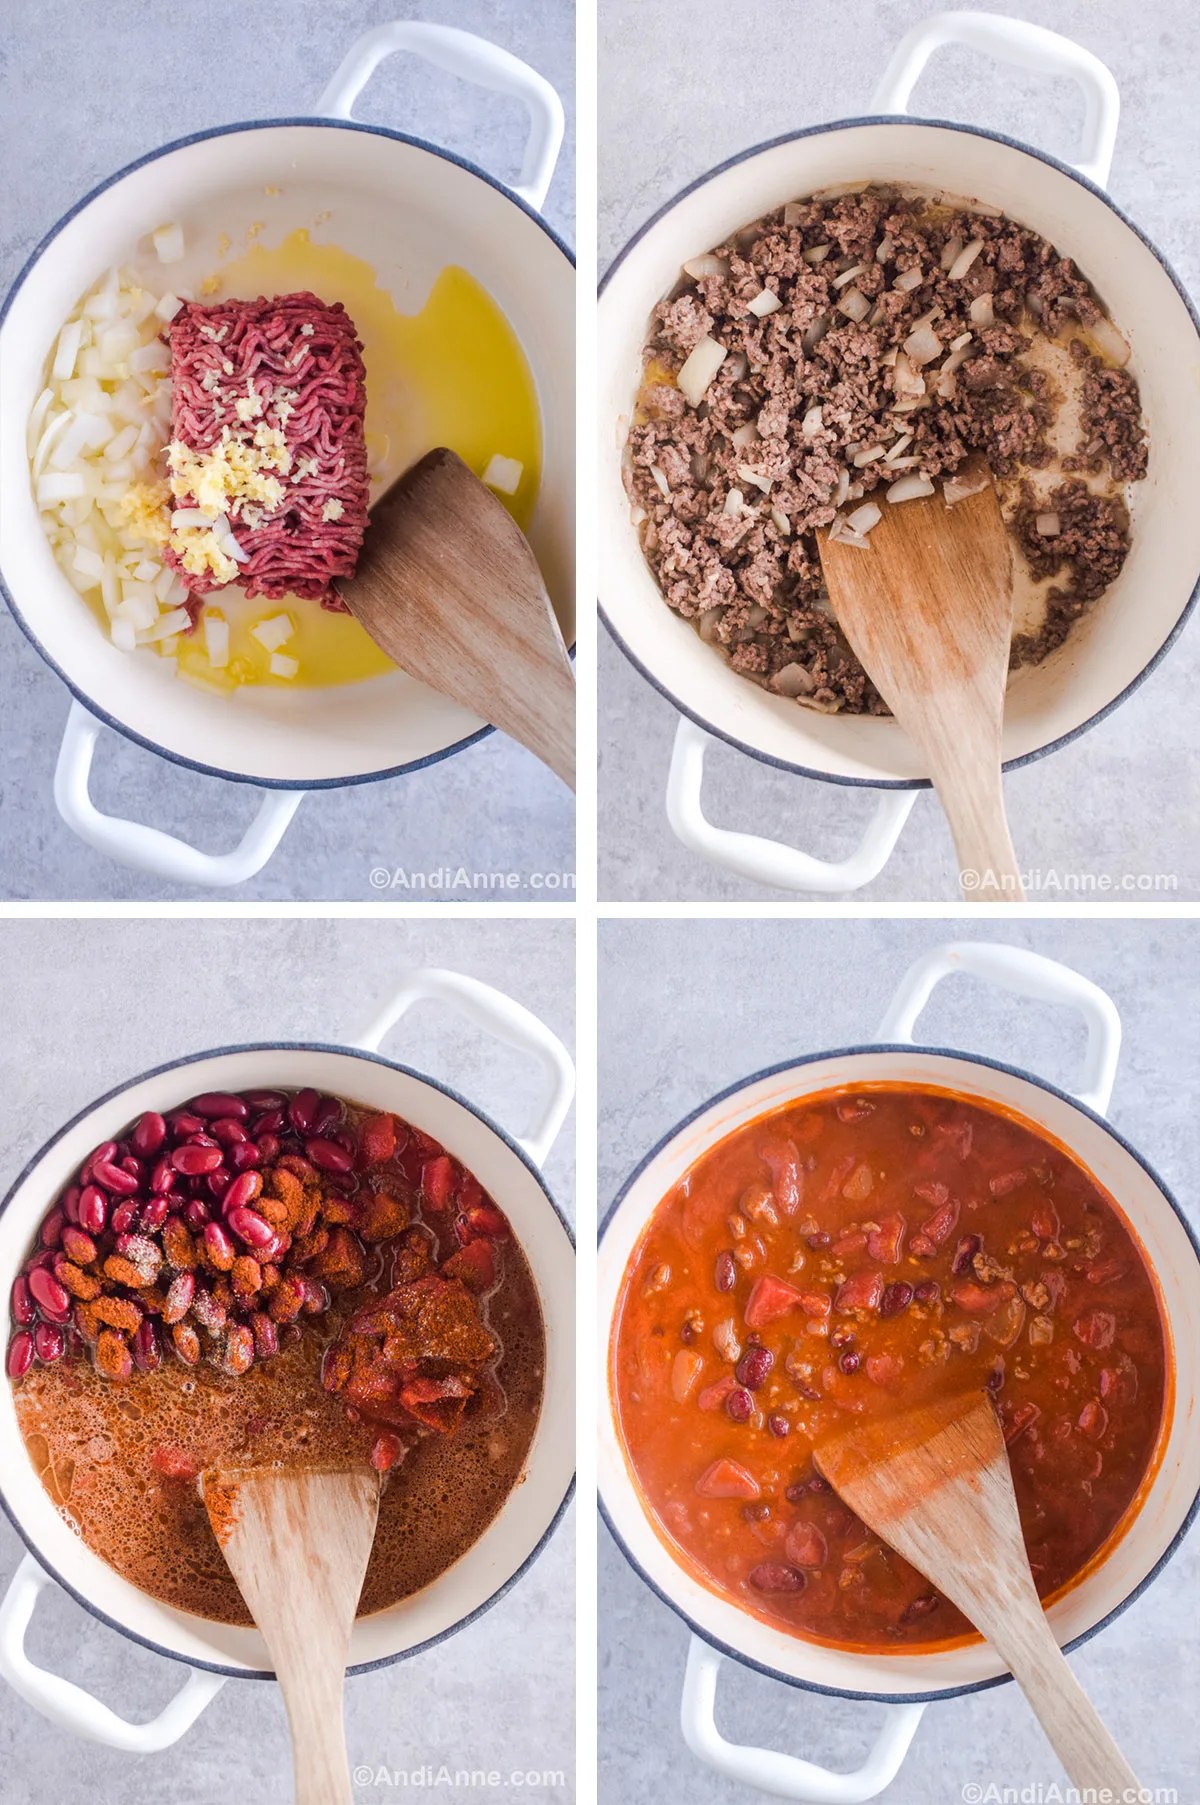 Four images of a white pot showing steps to make the recipe. First is pot with raw ground beef and chopped onion. Second is cooked ground beef and onion. Third is kidney beans, spices, and liquid in the pot. Fourth is cooked chili in the pot.